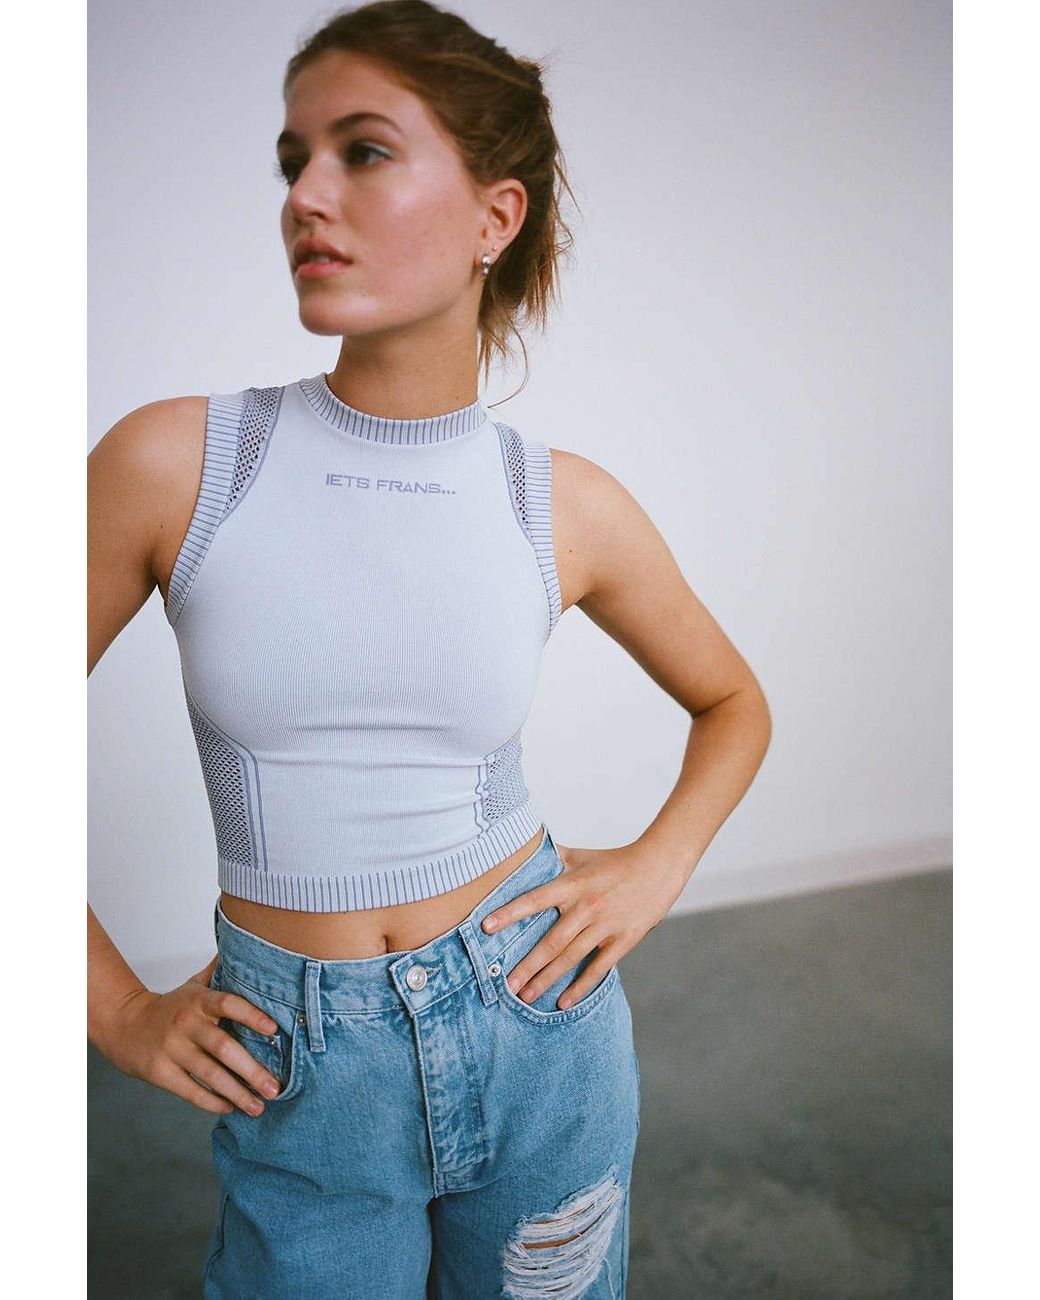 iets frans... Serena Cropped Tank Top in Blue | Lyst Canada